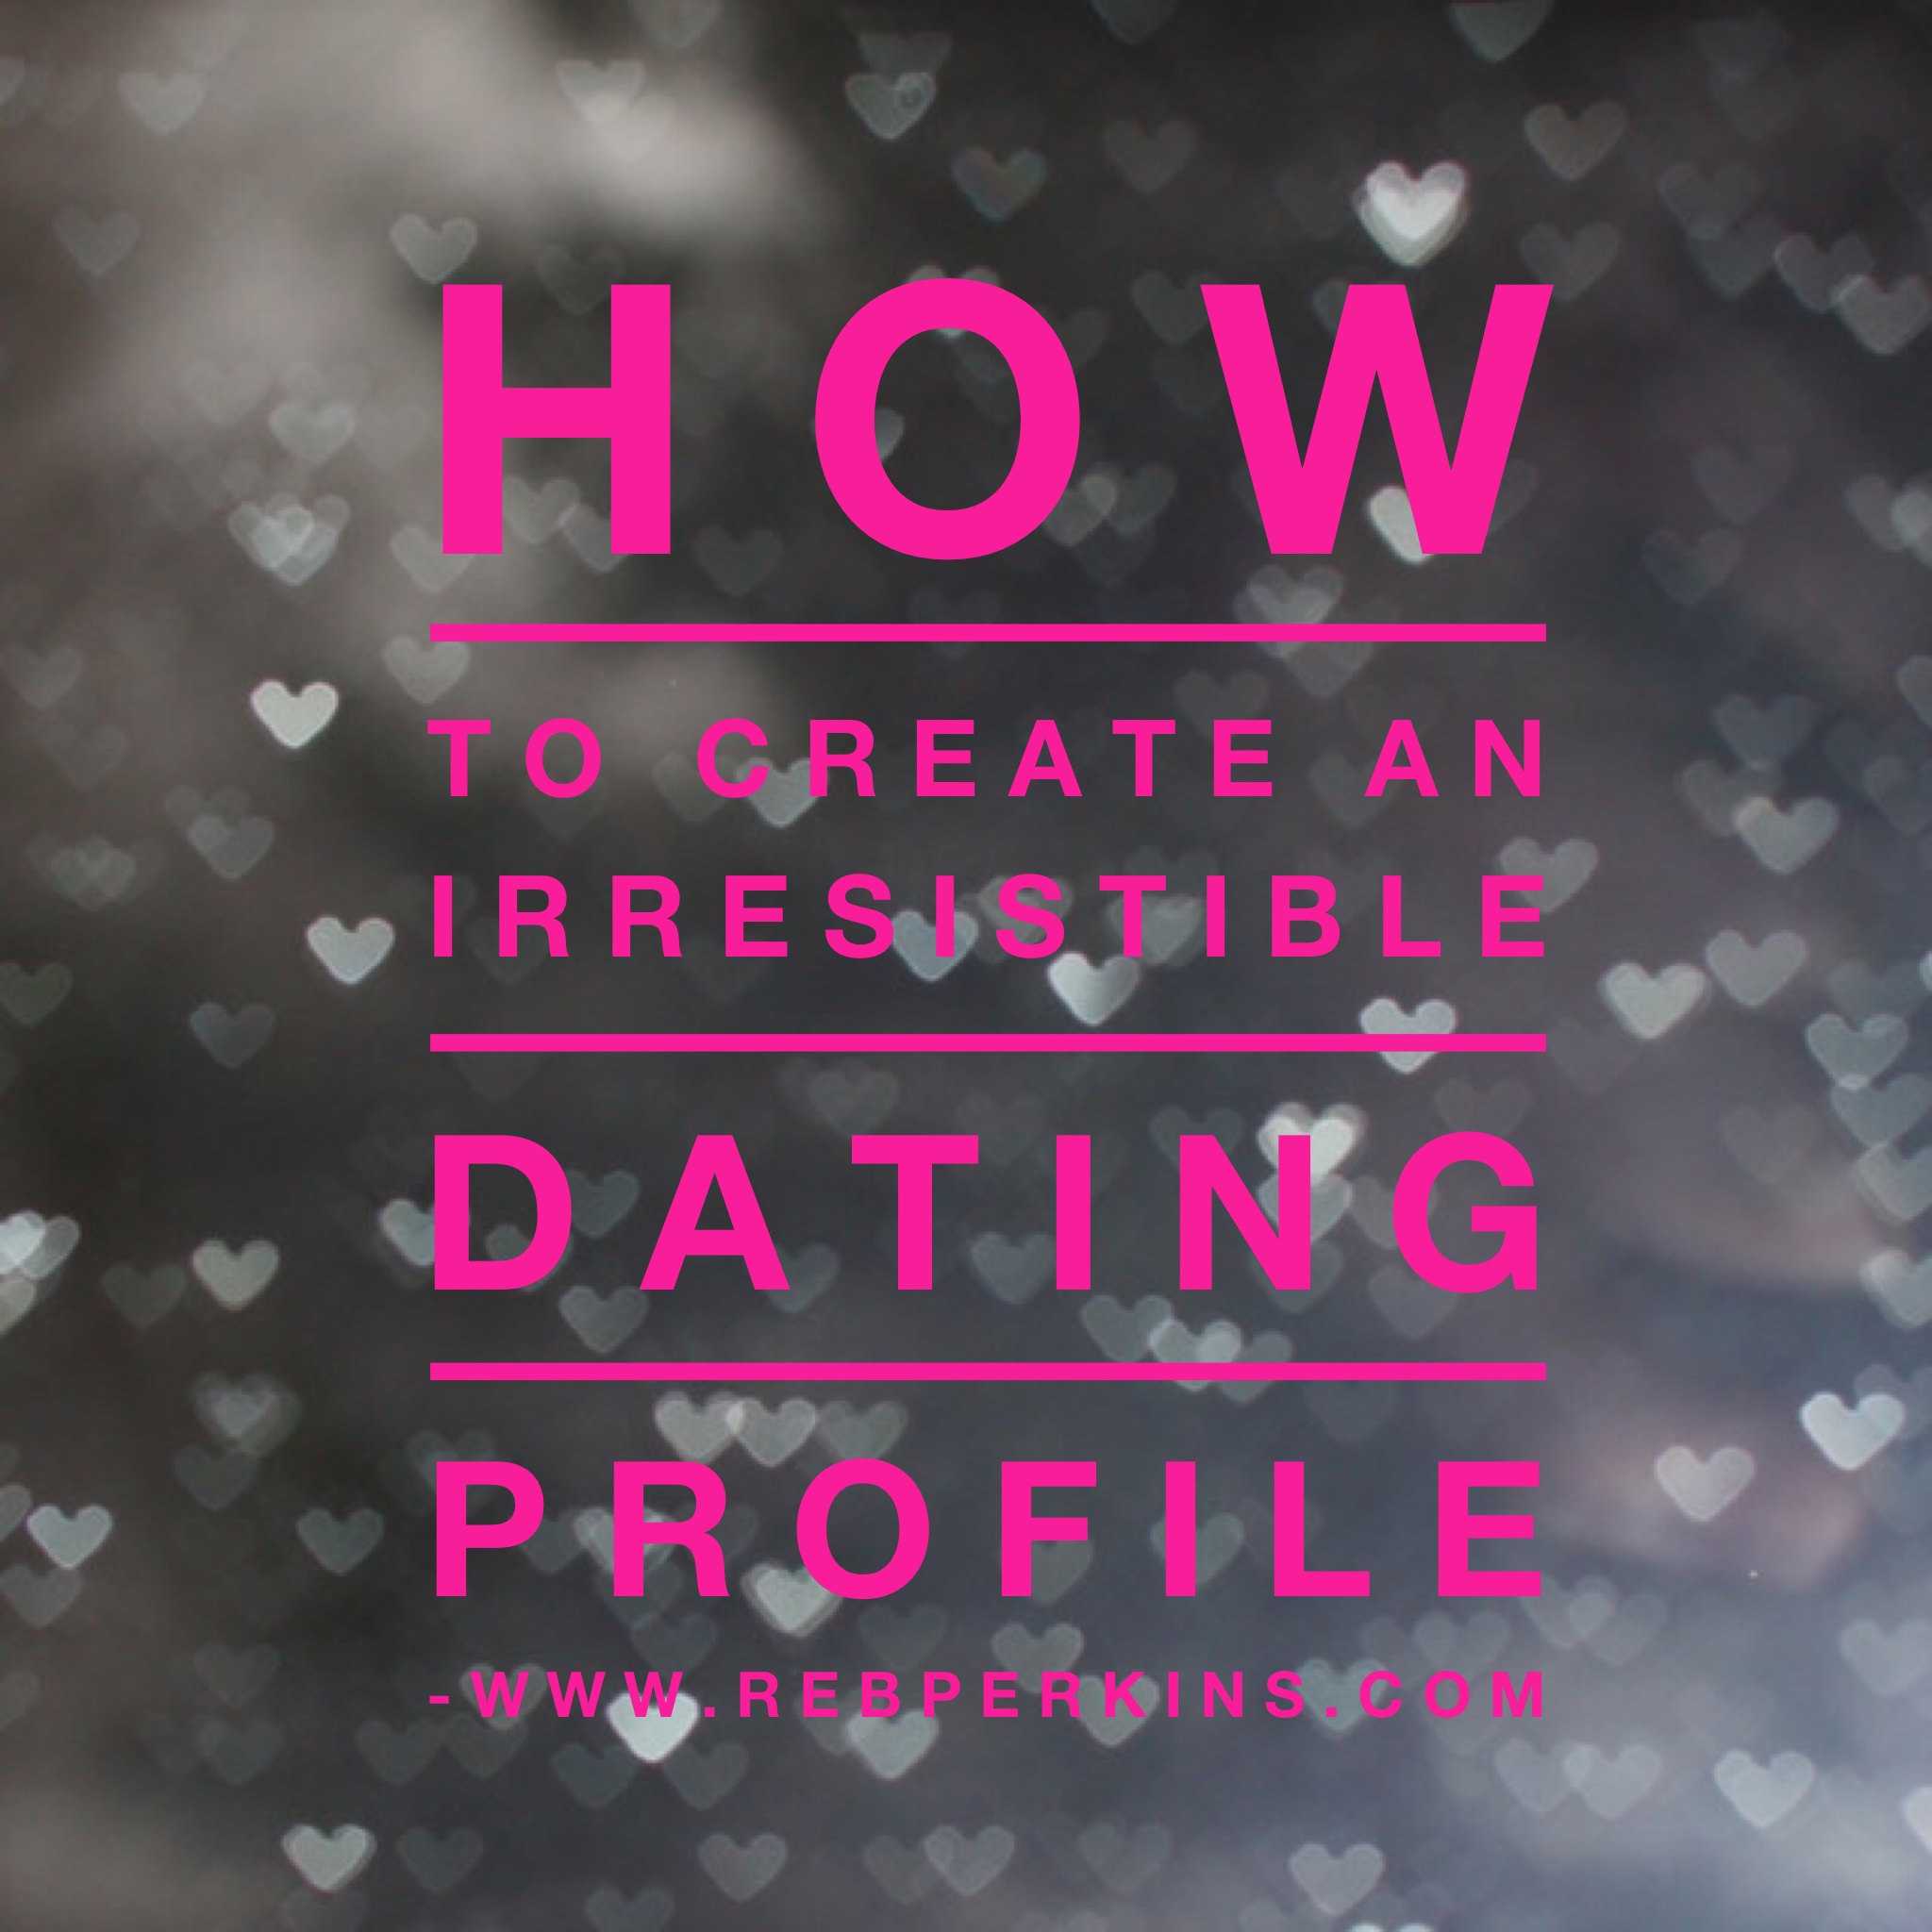 How to make a great online dating profile